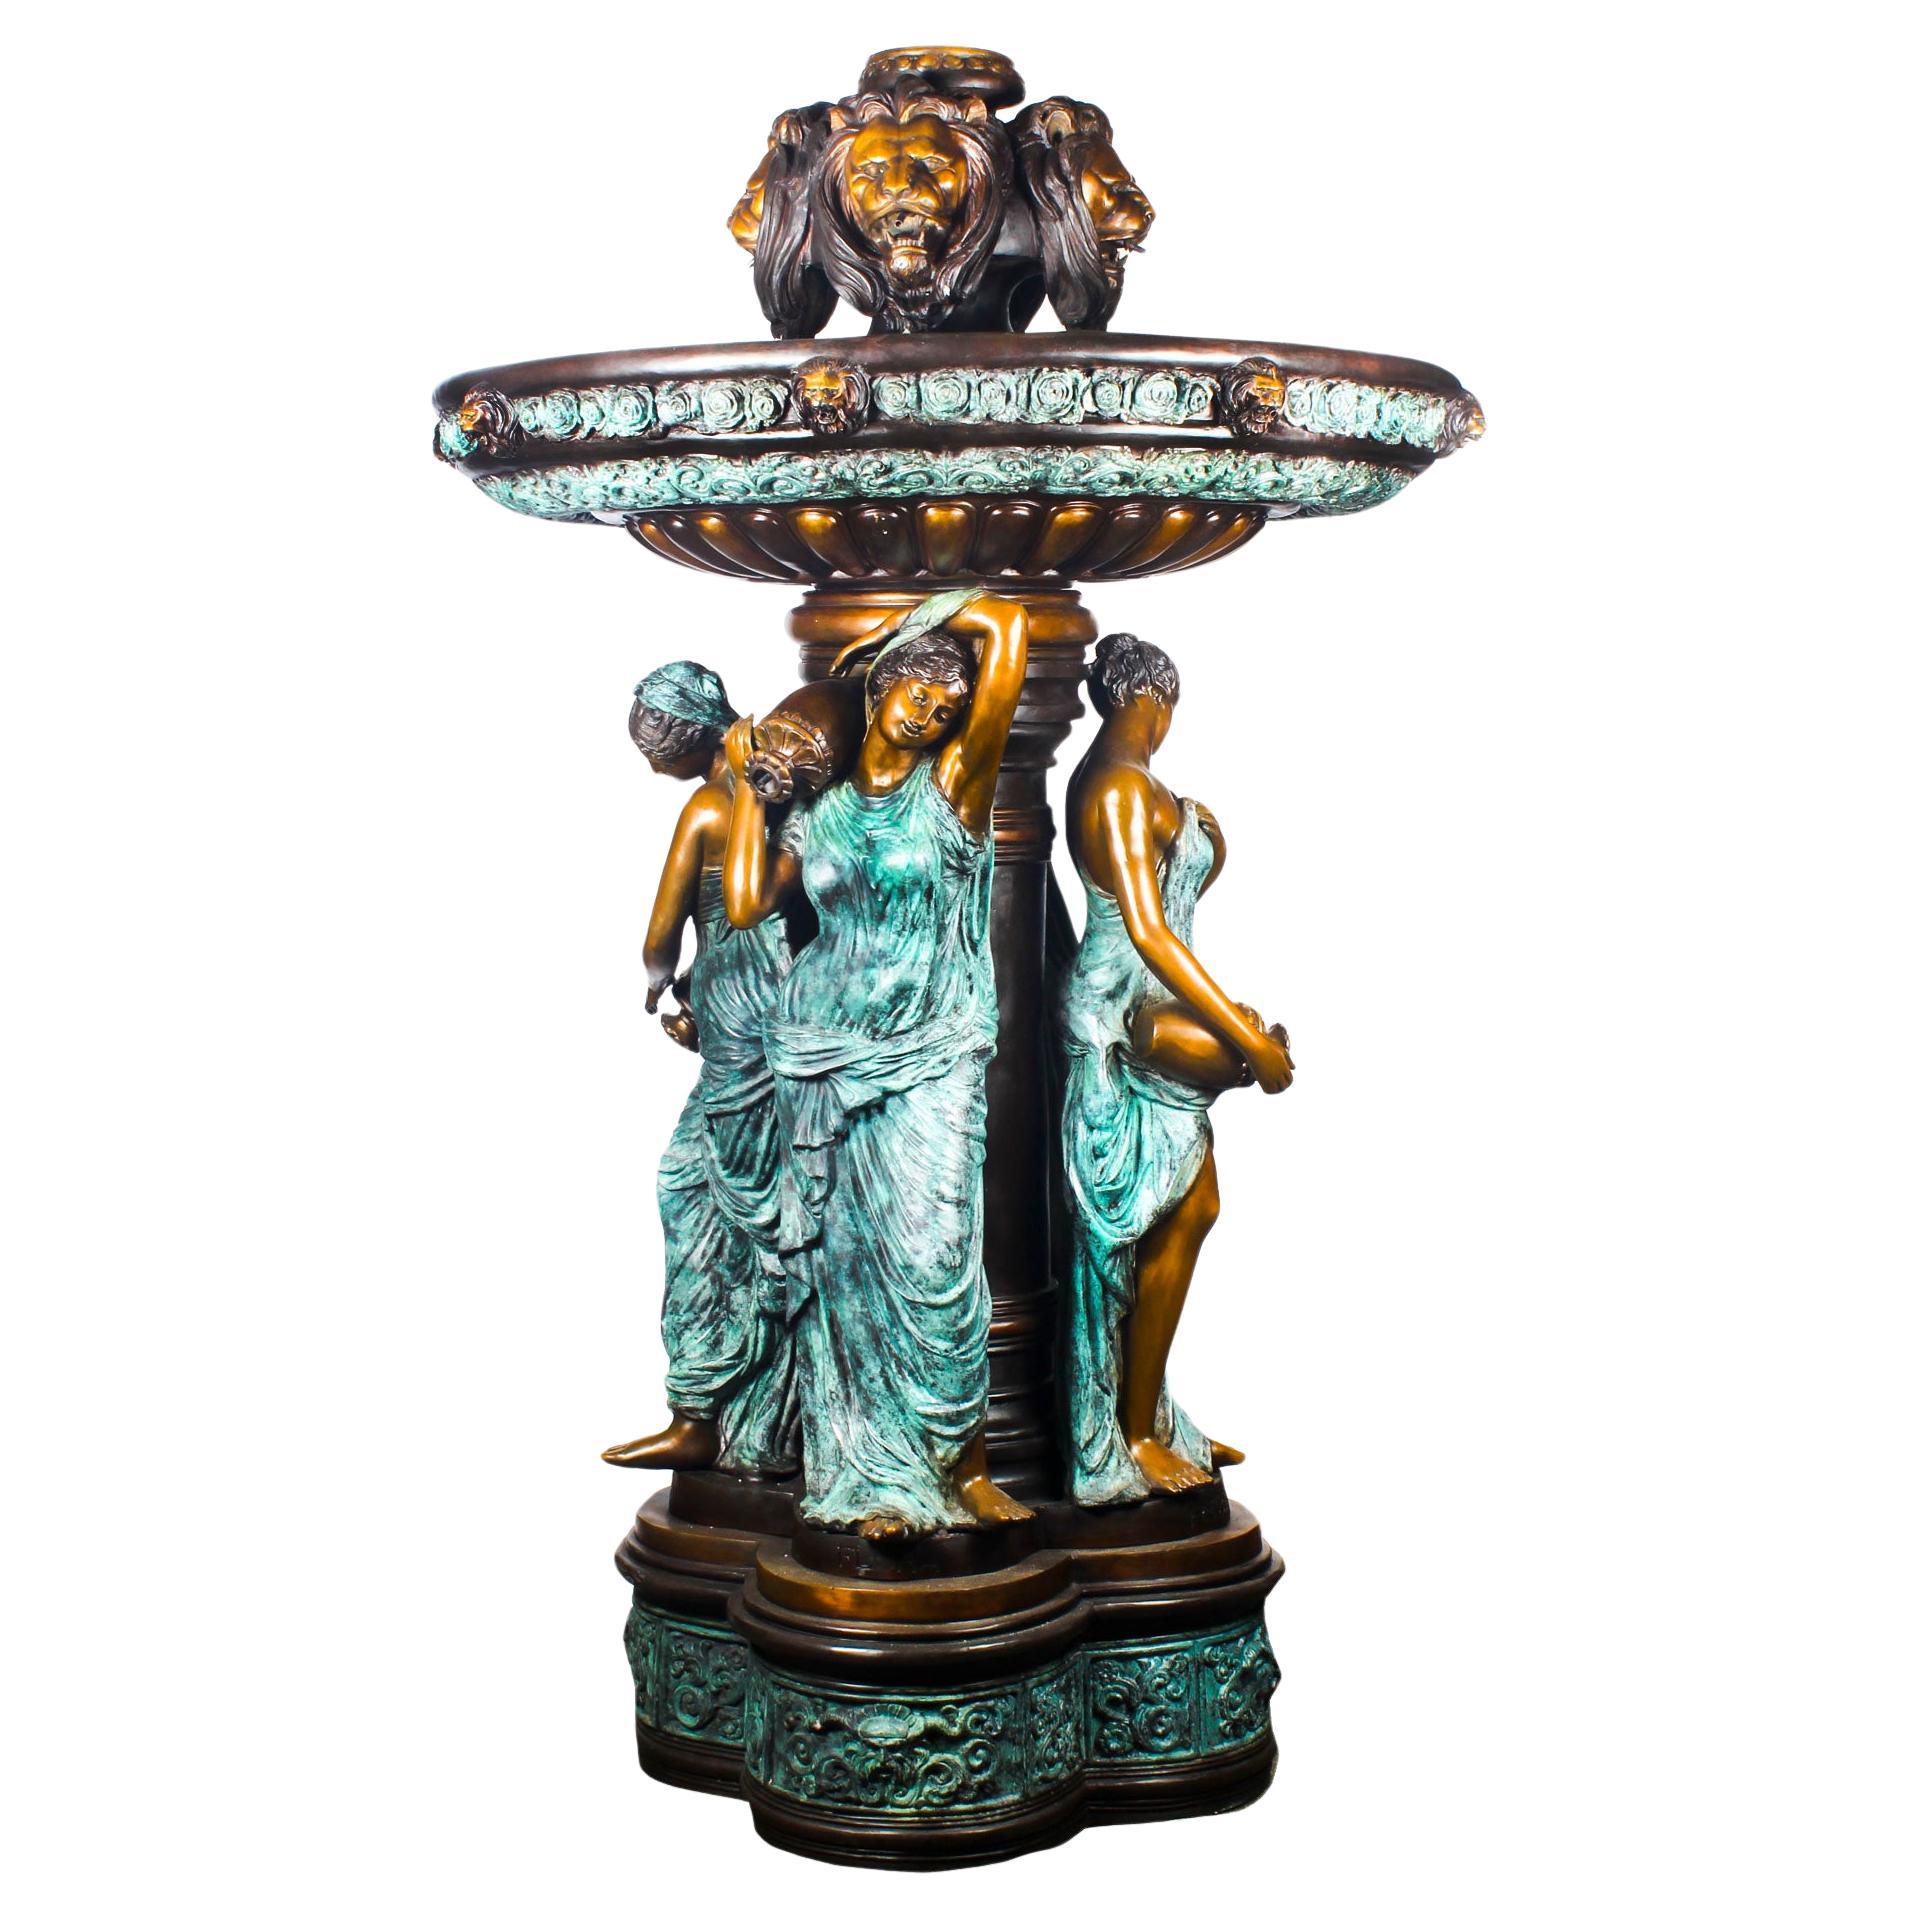 Vintage Monumental Neo-Classical Revival Bronze Sculptural Pond Fountain 20th C For Sale